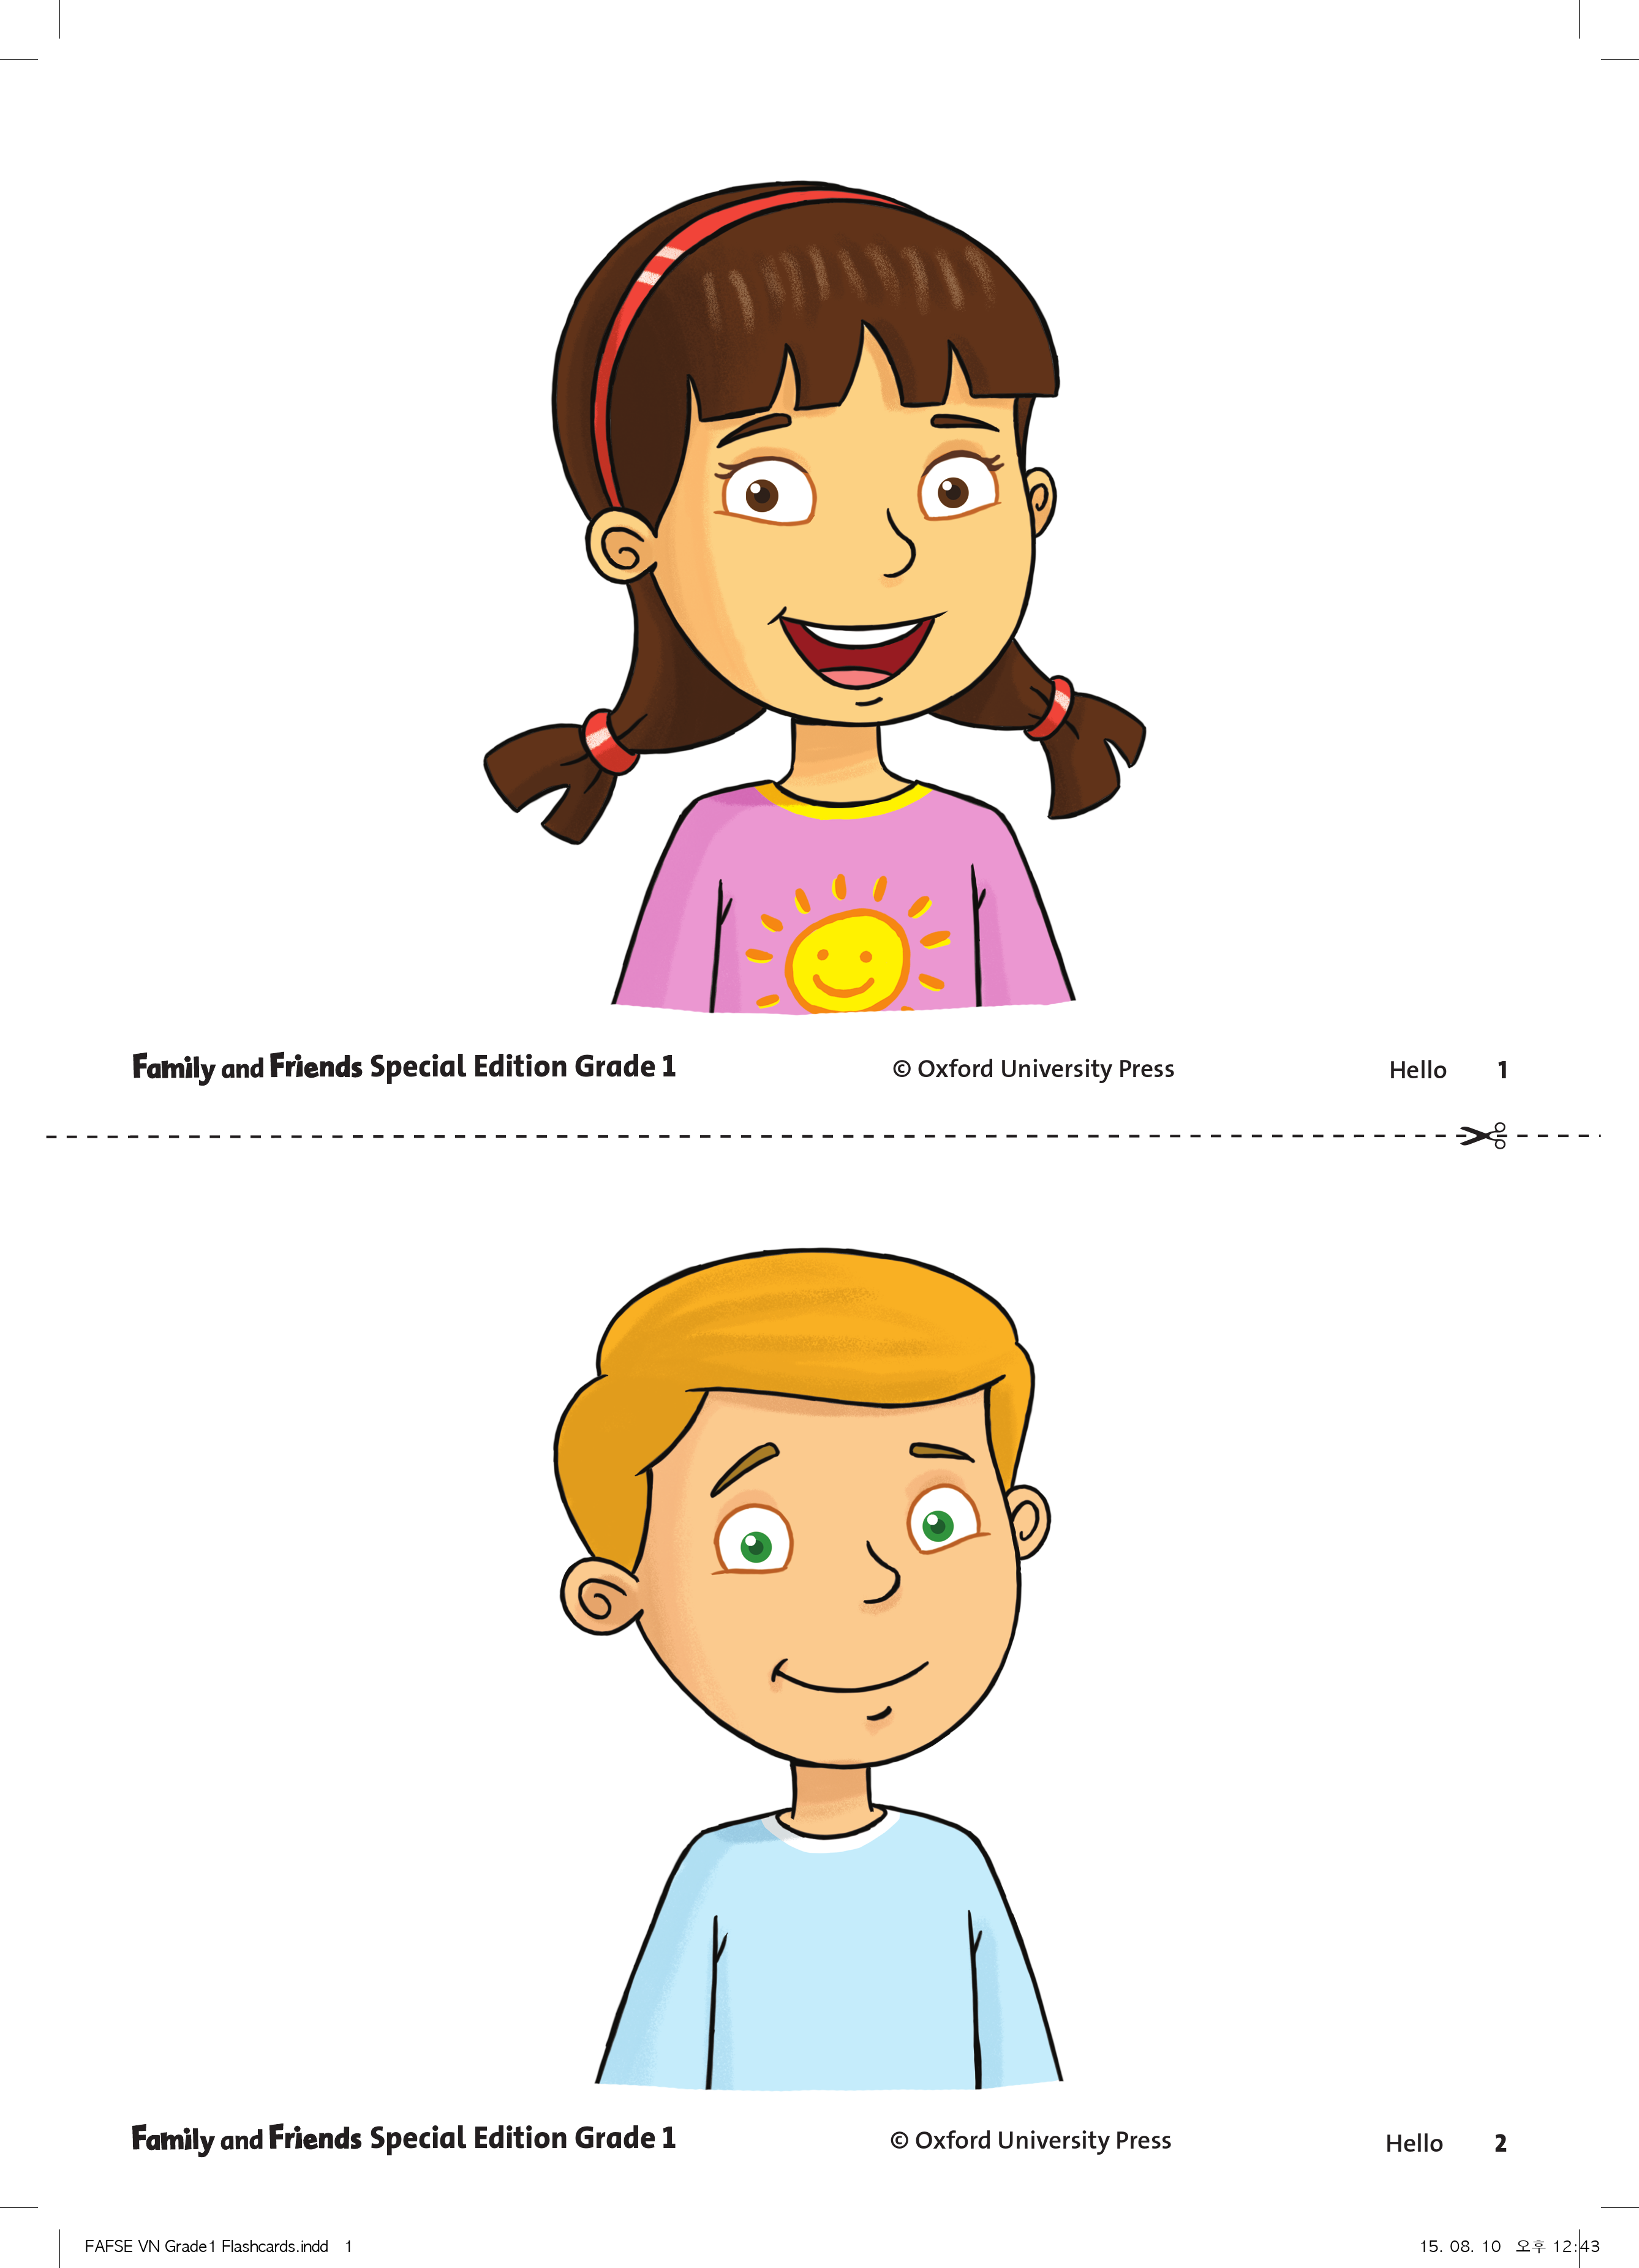 Family and friends Starter карточки. Family and friends Starter Flashcards. Family and friends 1 Flashcards. Family and friends 1 2nd Edition Flashcards. Френд 2